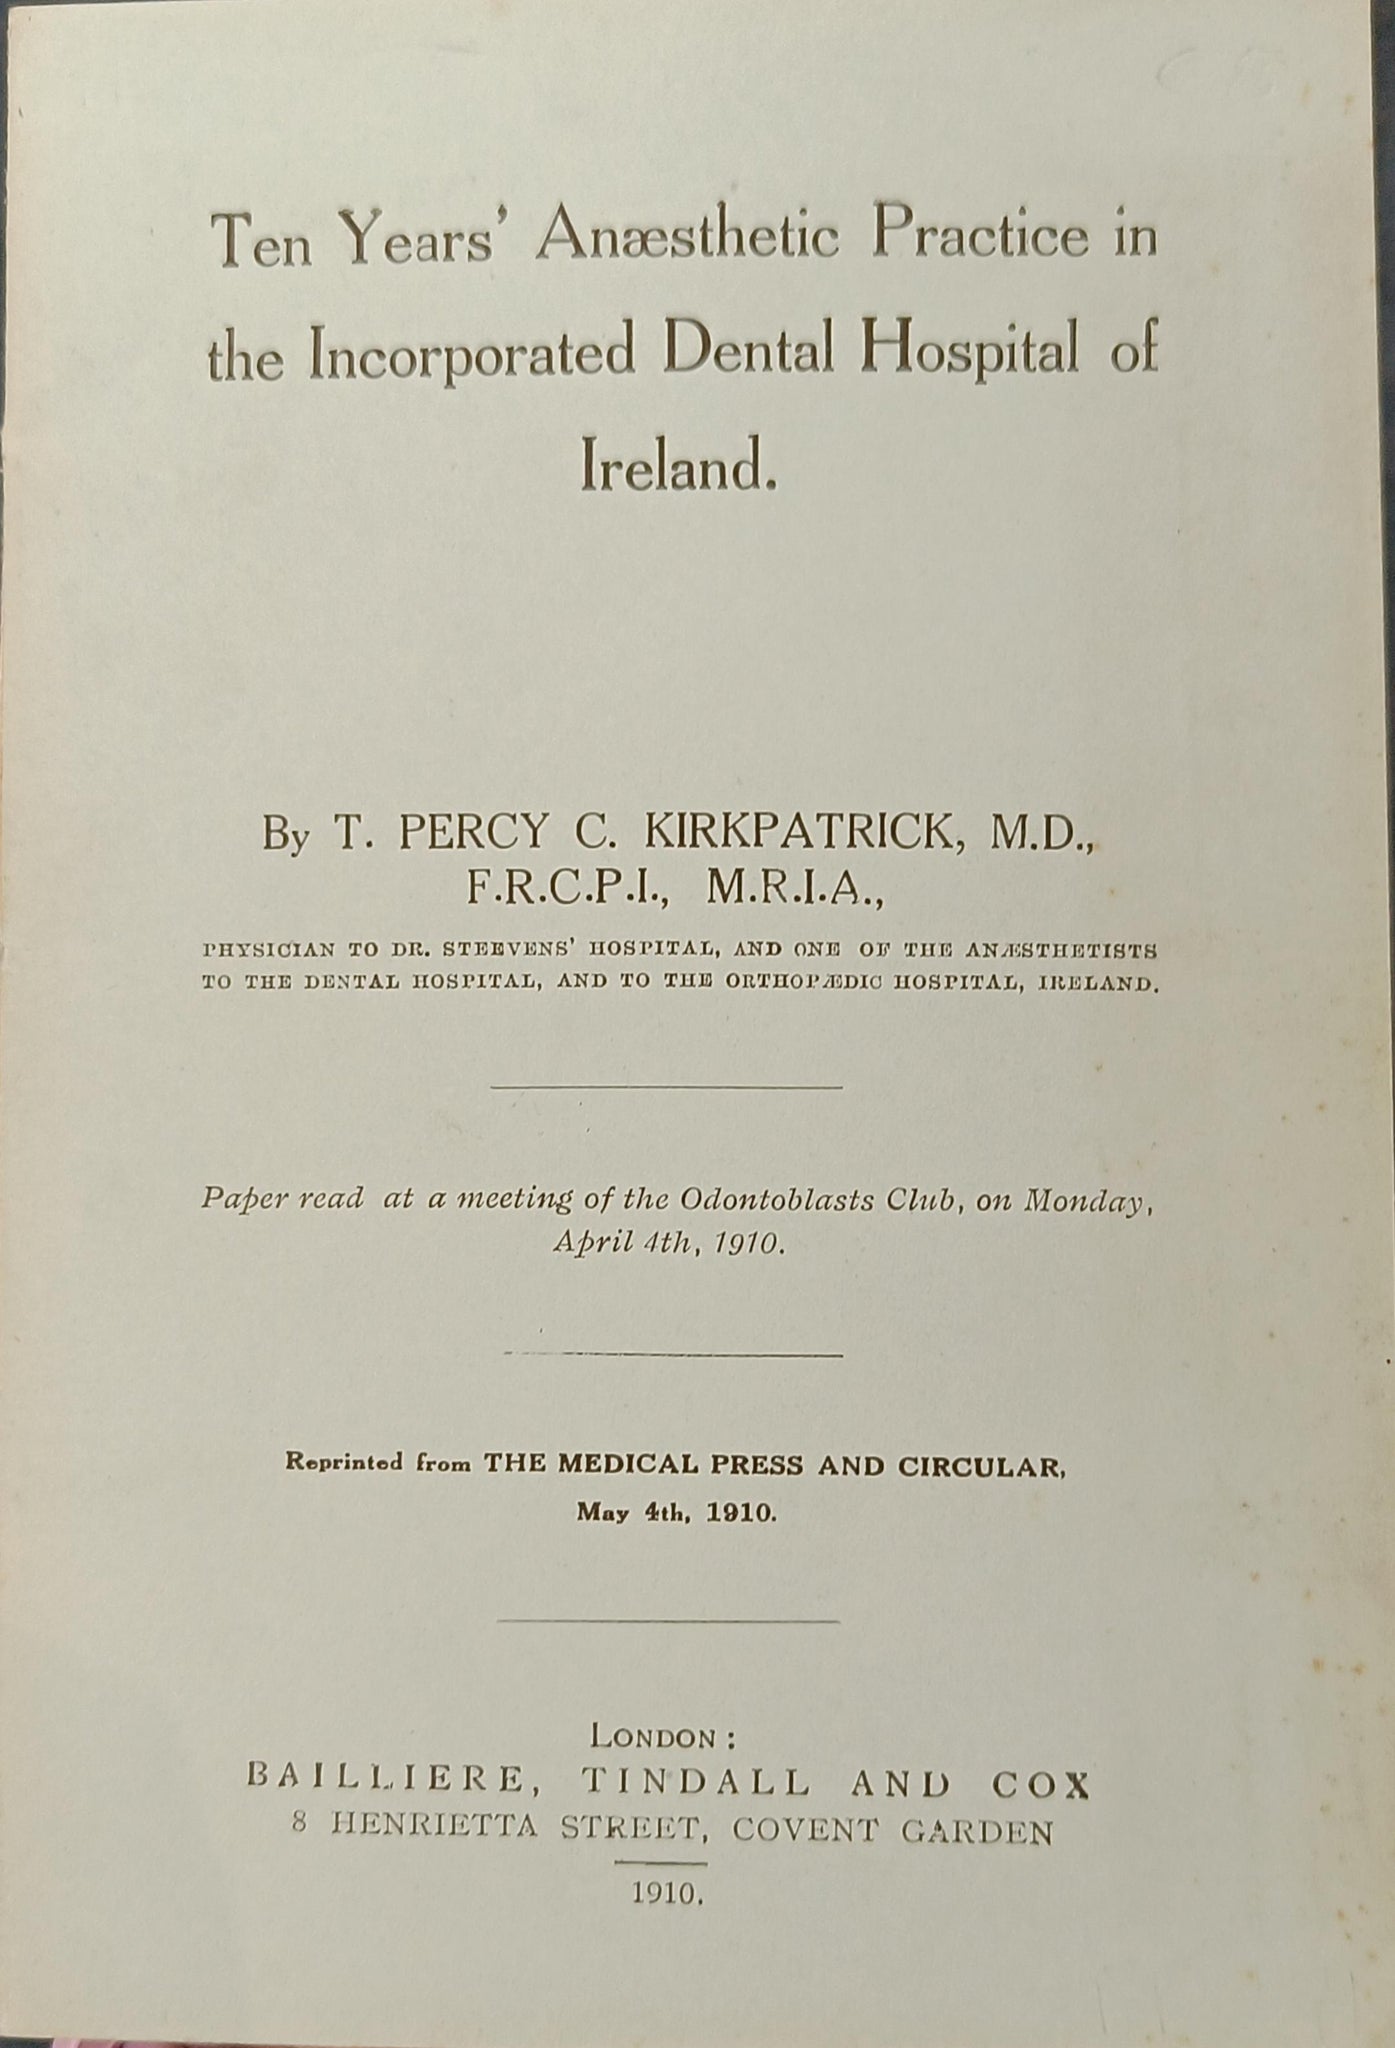 Ten Years' Anaesthetic Practice in Incorporated Dental Hospital of Ireland, by T. Percy C. Kirkpatrick